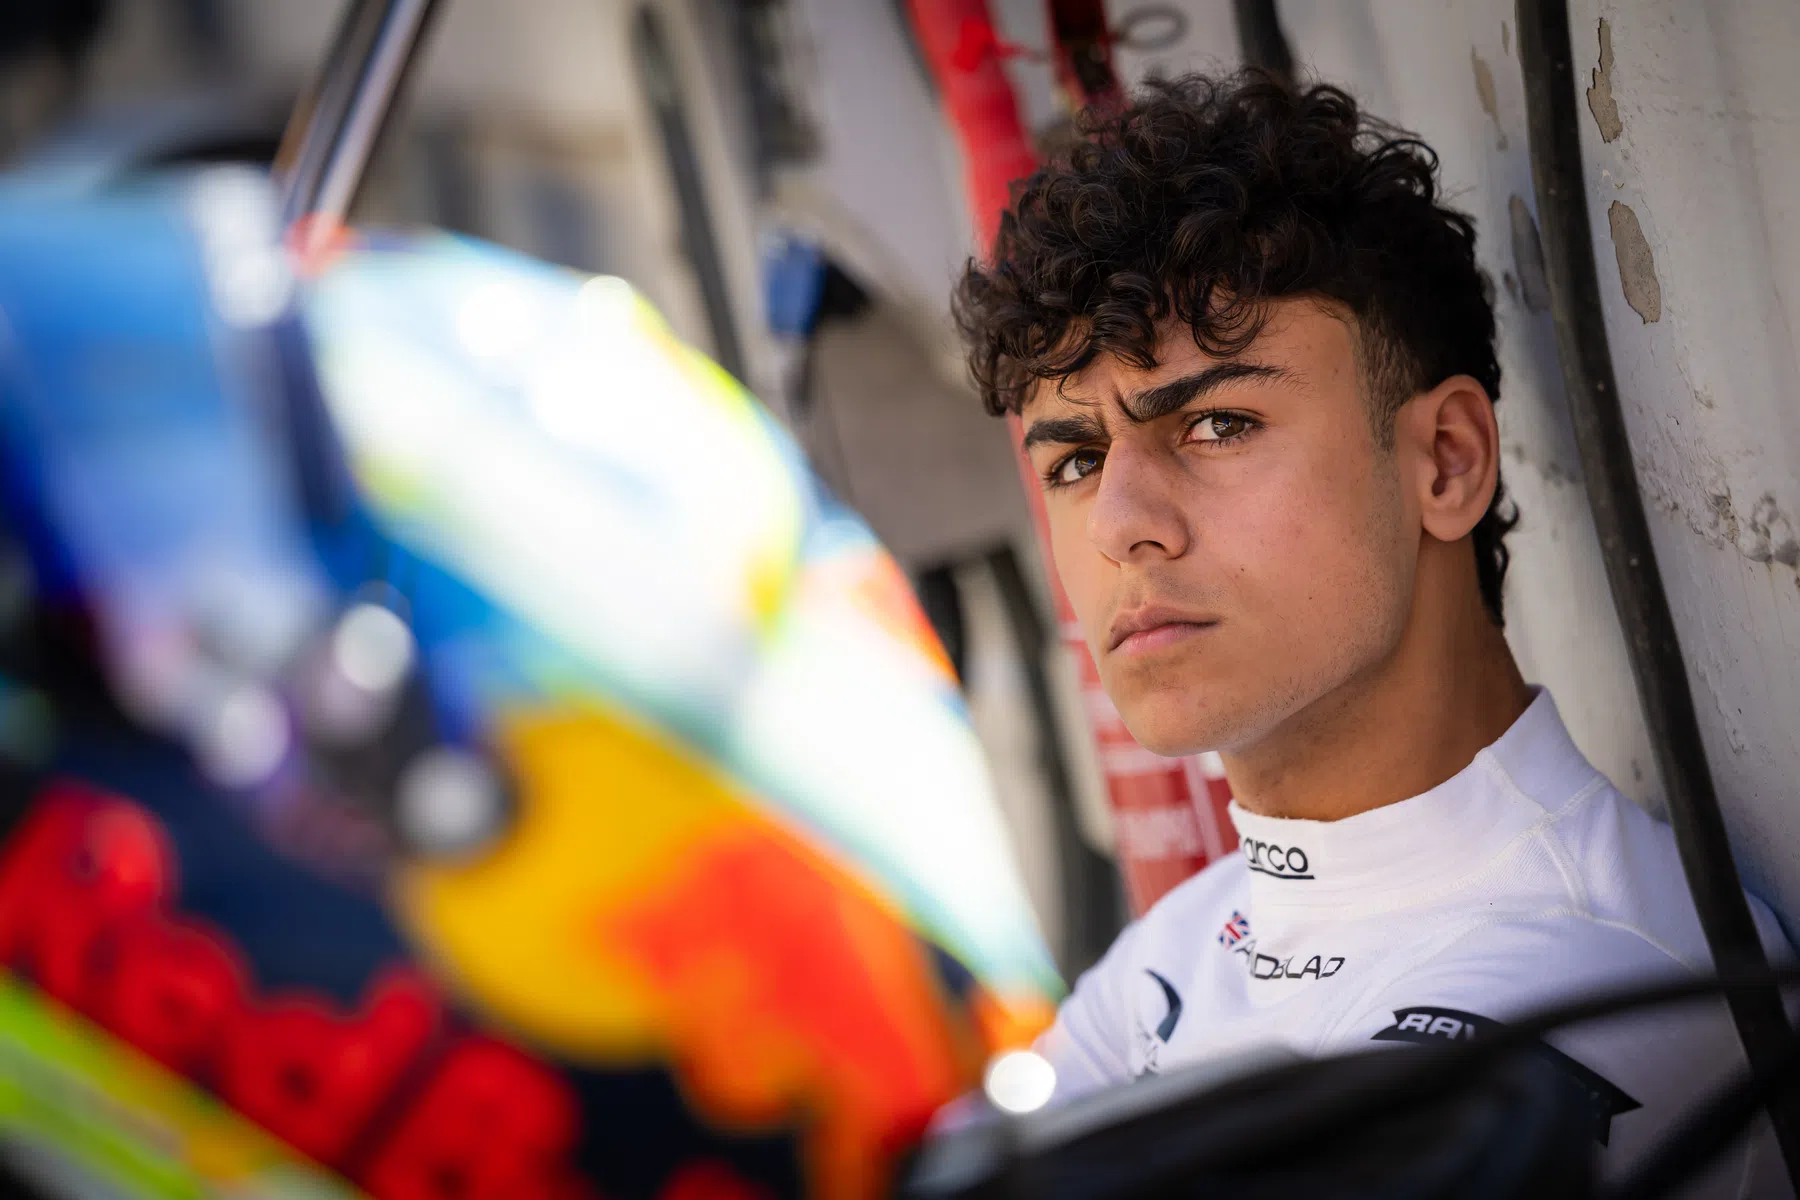 Red Bull and British talent arvin Lindblad with F3 win at the spanish gp 